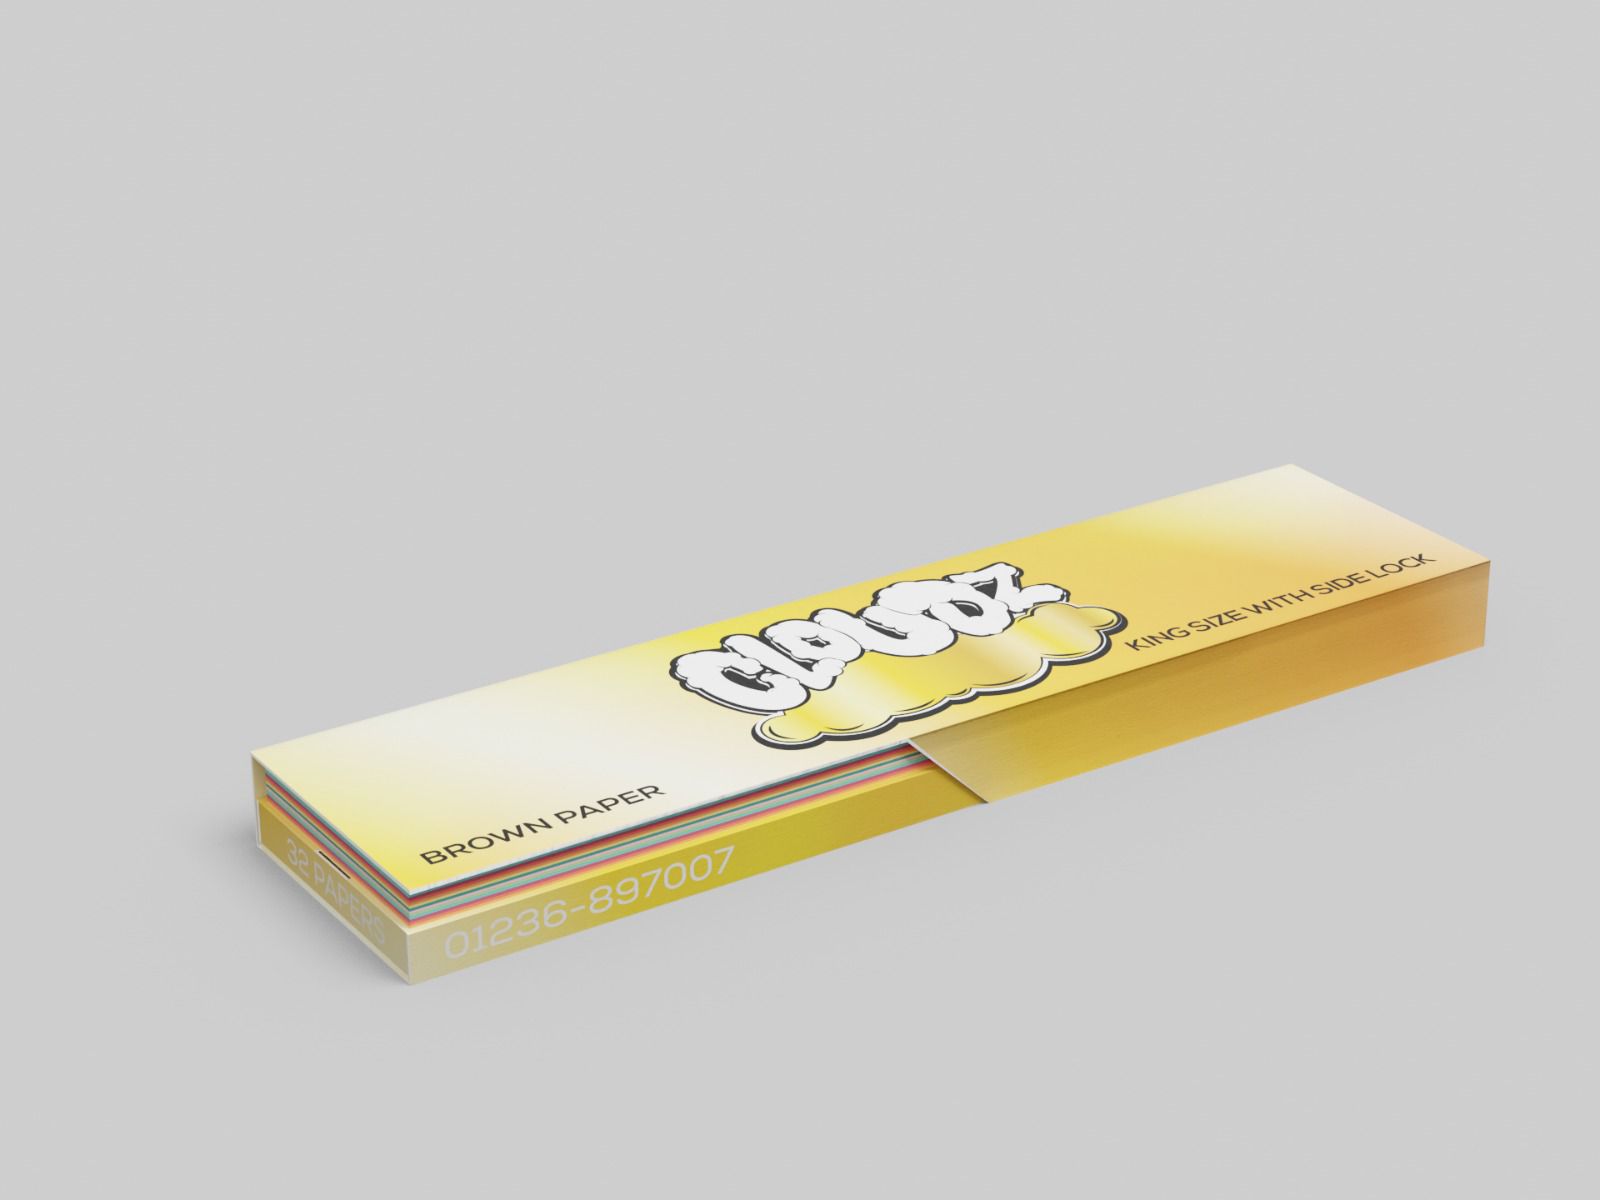 CLOUDZ ROLLING PAPERS - BROWN (24)